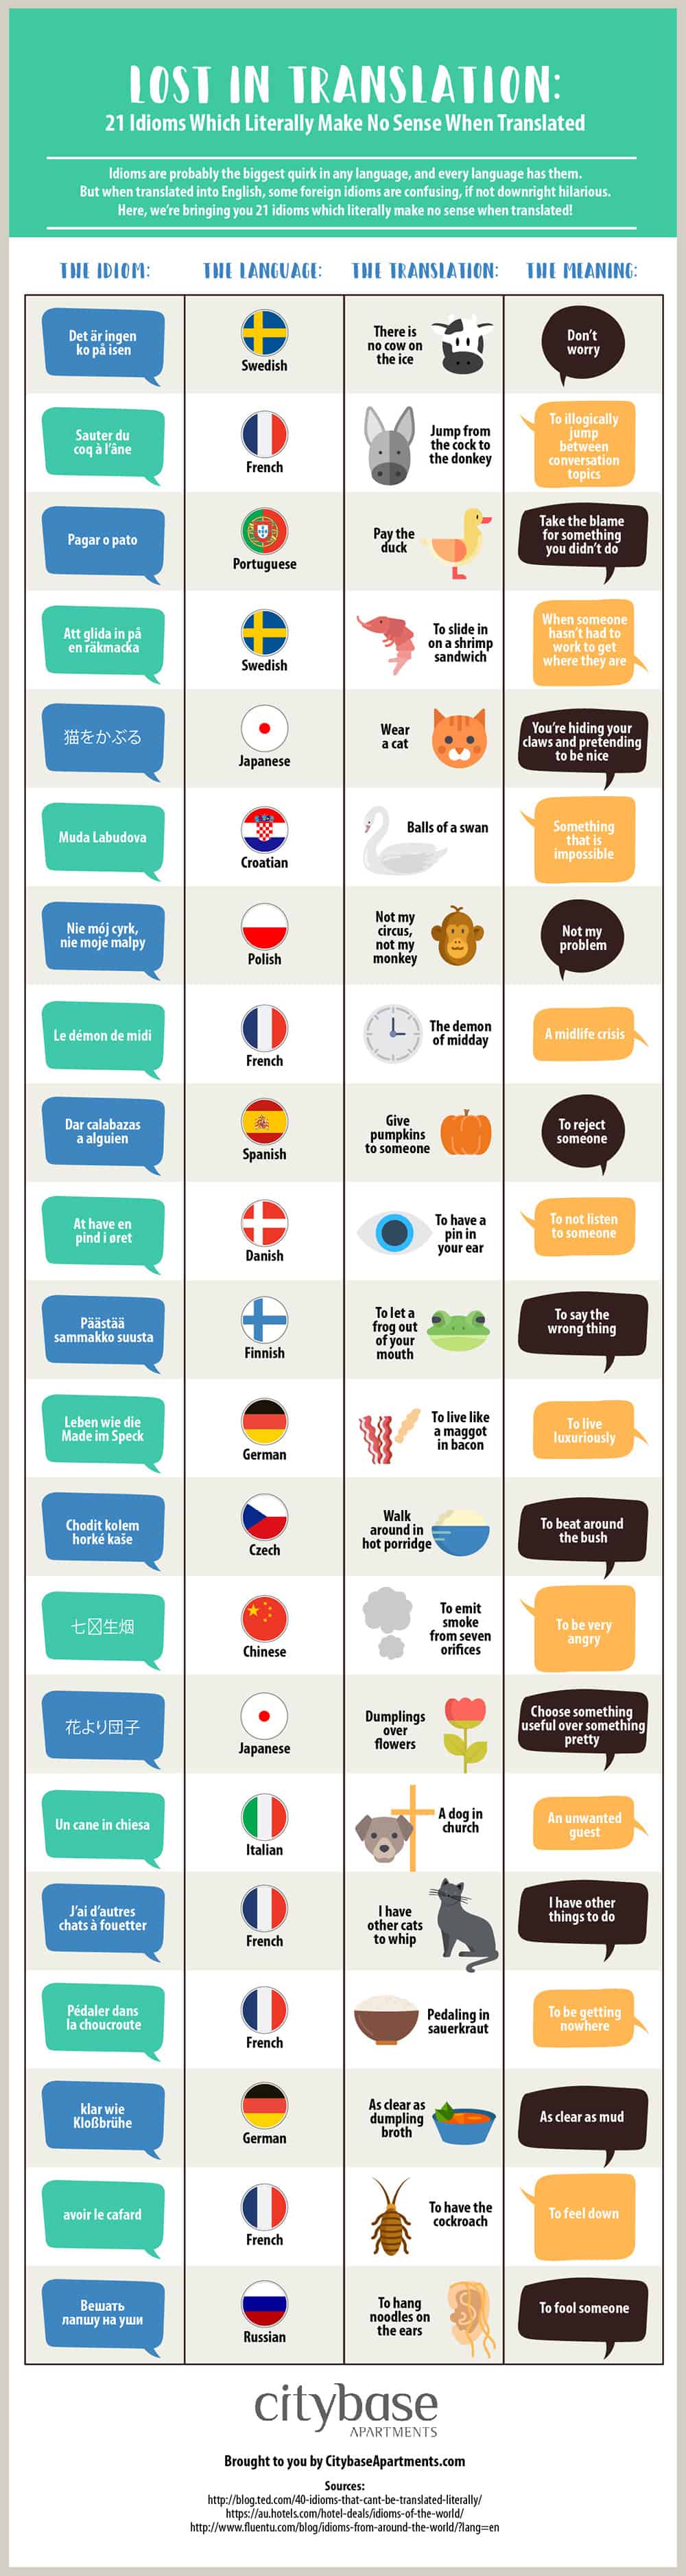 Hilarious Sayings That Don't Make Sense Translated | Daily Infographic